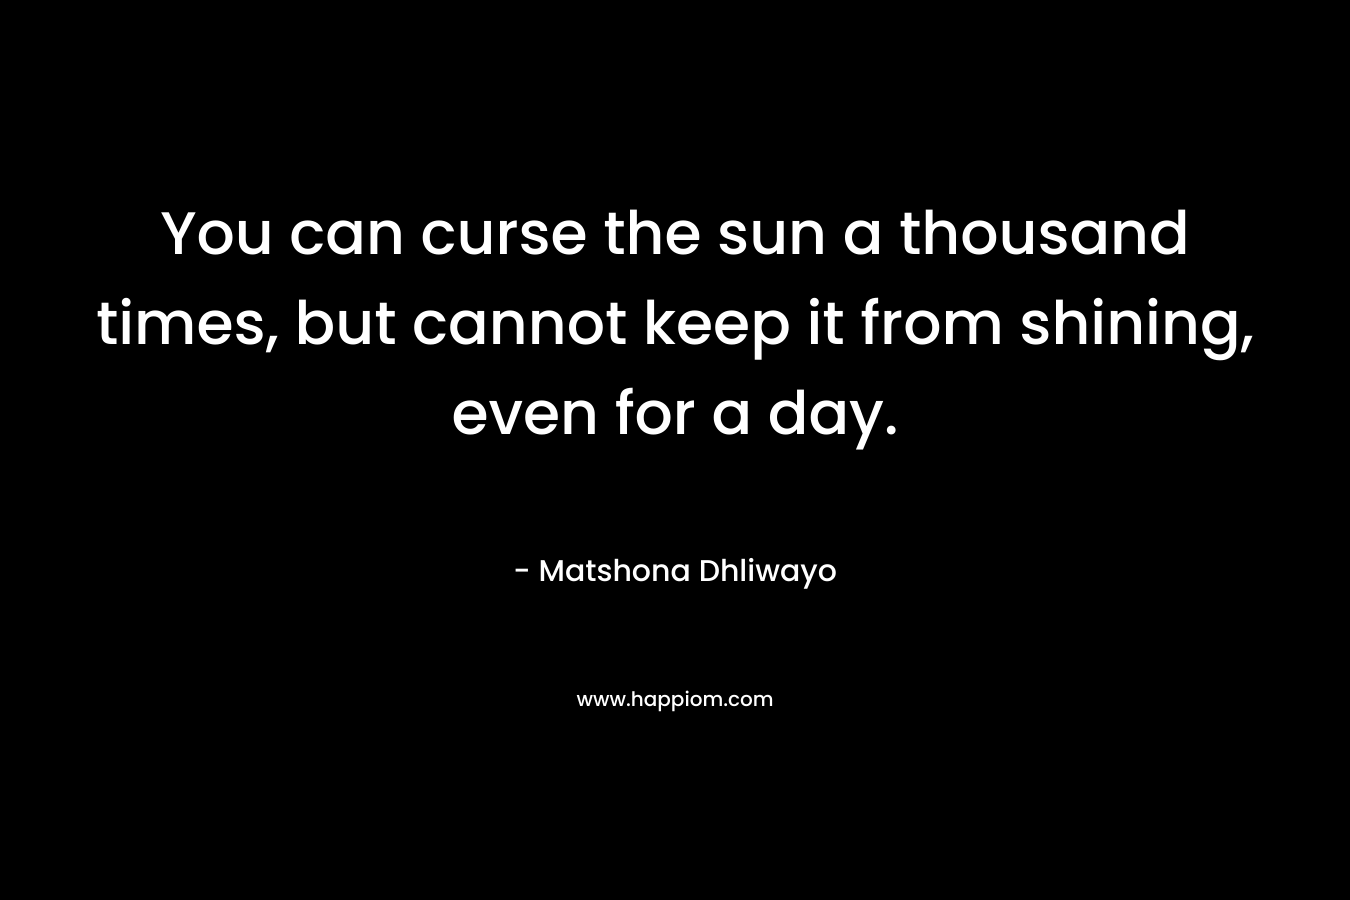 You can curse the sun a thousand times, but cannot keep it from shining, even for a day.